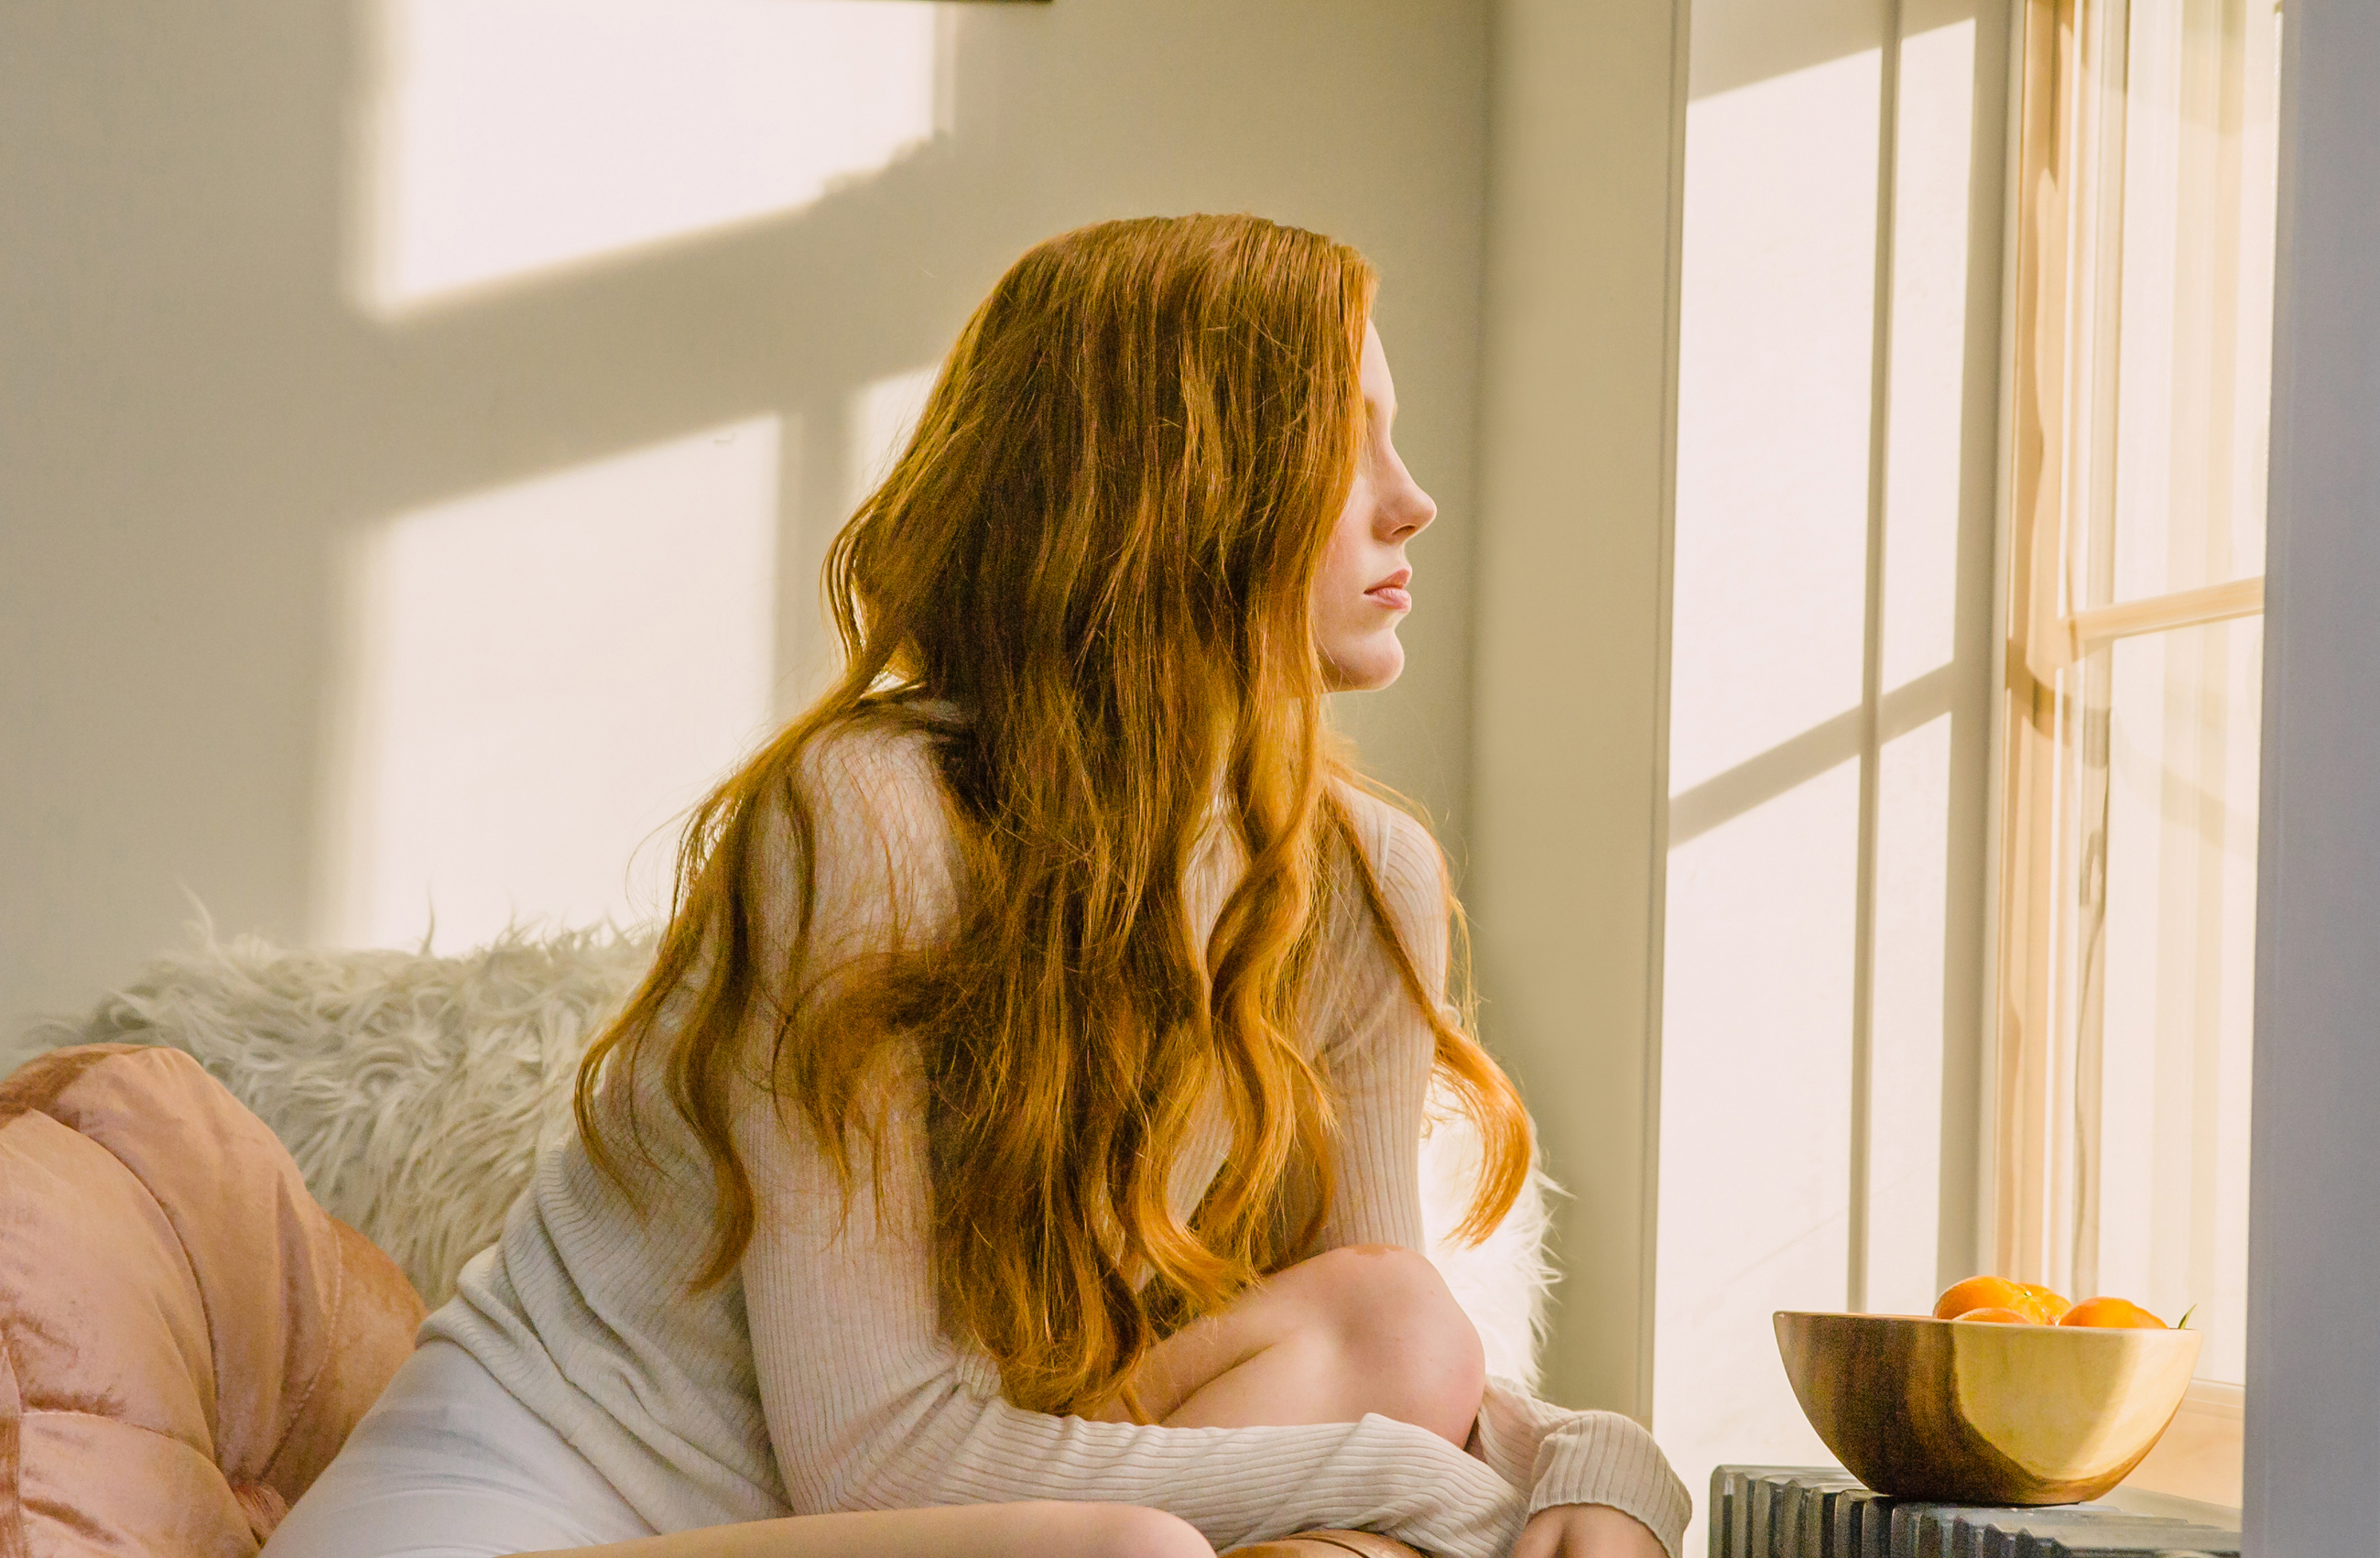 Prose model with long, red, wavy hair looking out a window with soft sunlight flooding in